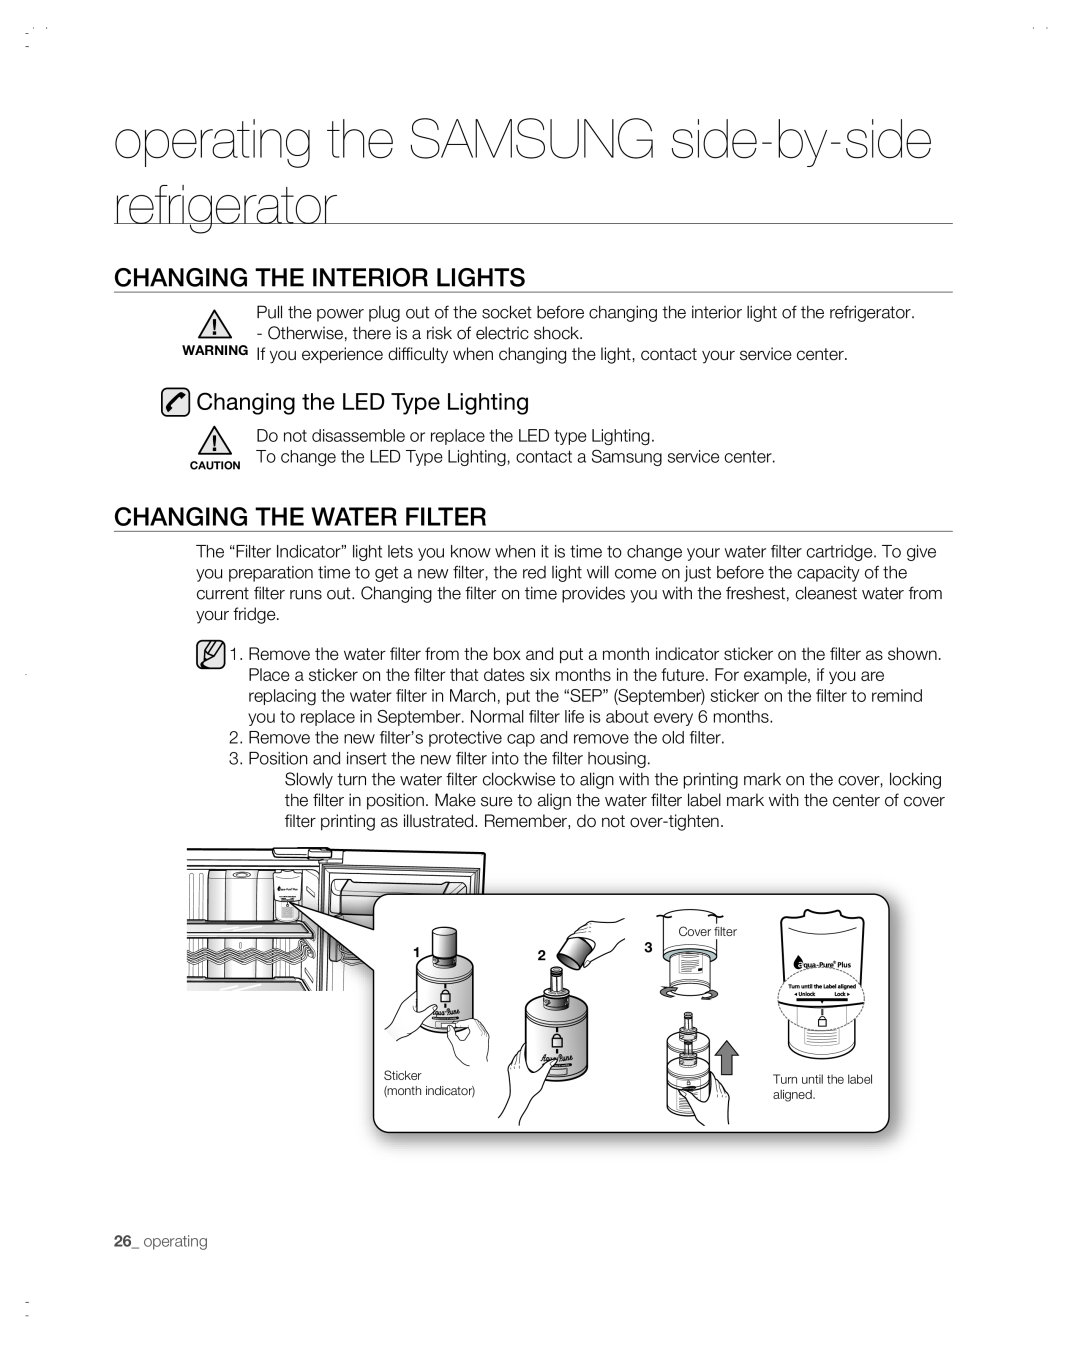 Samsung RSG257AABP user manual CHANGING the interior lights, Changing the WATER FILTER, Changing the LED Type Lighting 